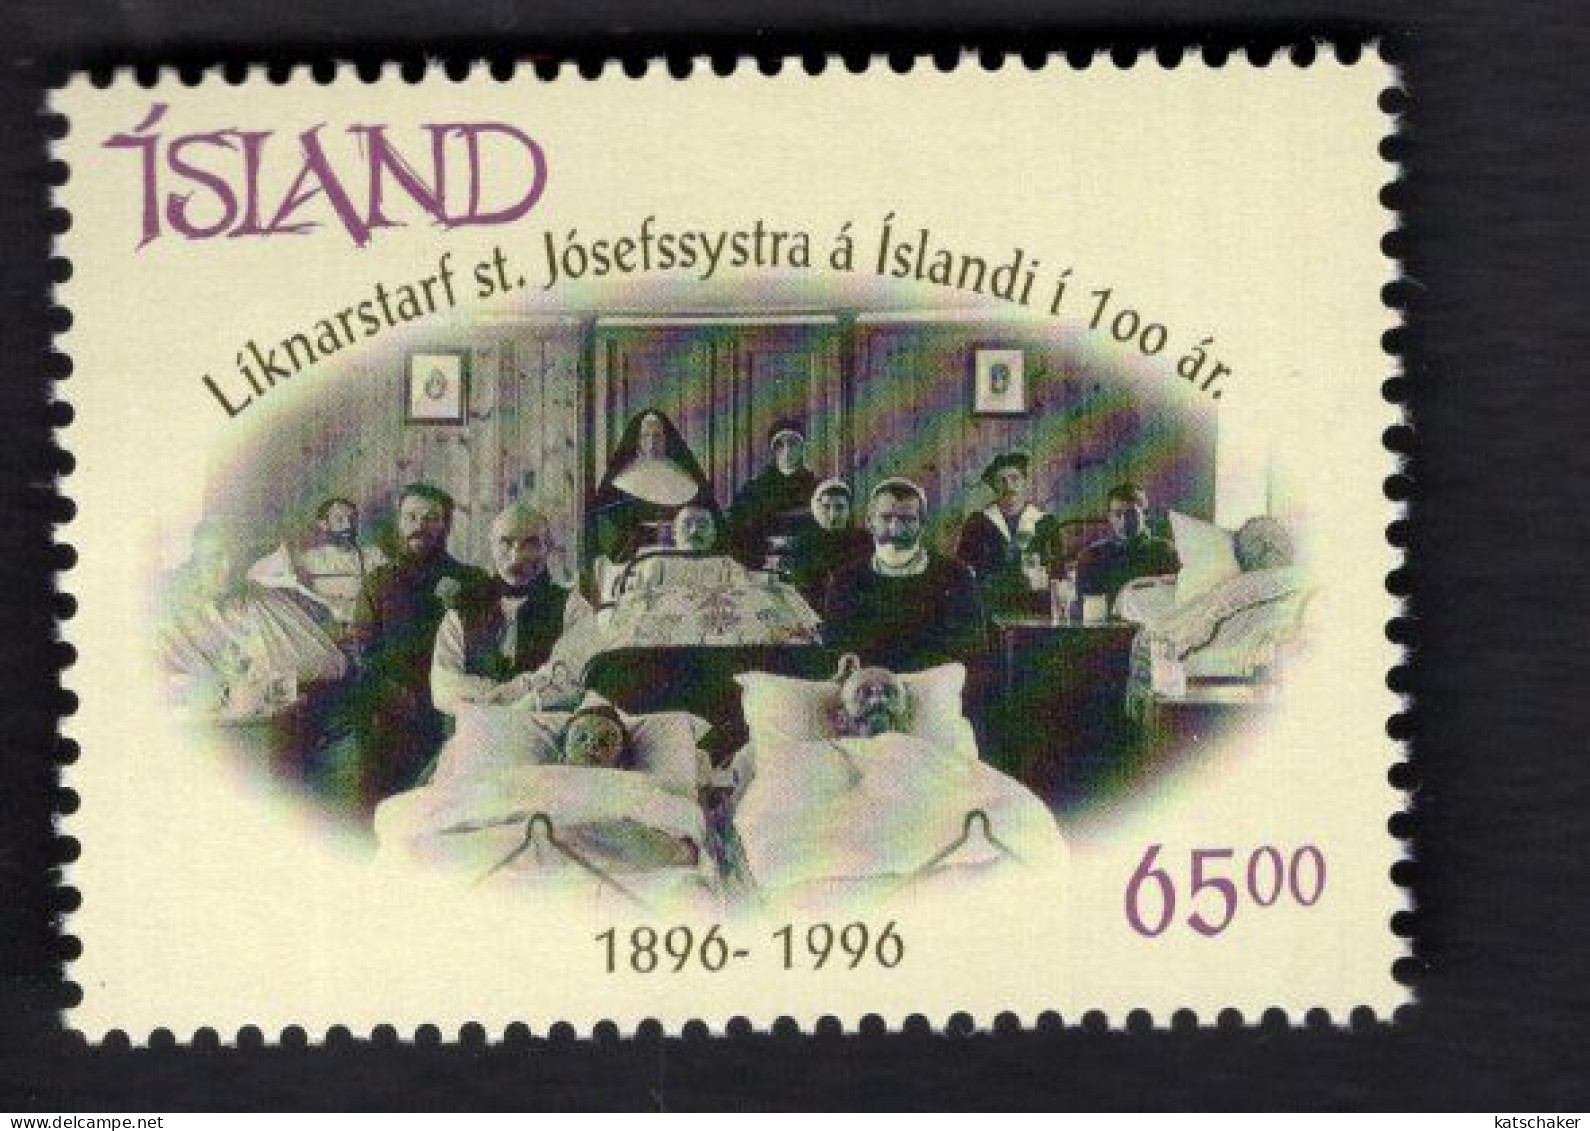 2022465560 1996 SCOTT 828 (XX)  POSTFRIS MINT NEVER HINGED - ORDER OF THE SISTERS OF ST. JOSEPH IN ICELAND - CENT. - Neufs